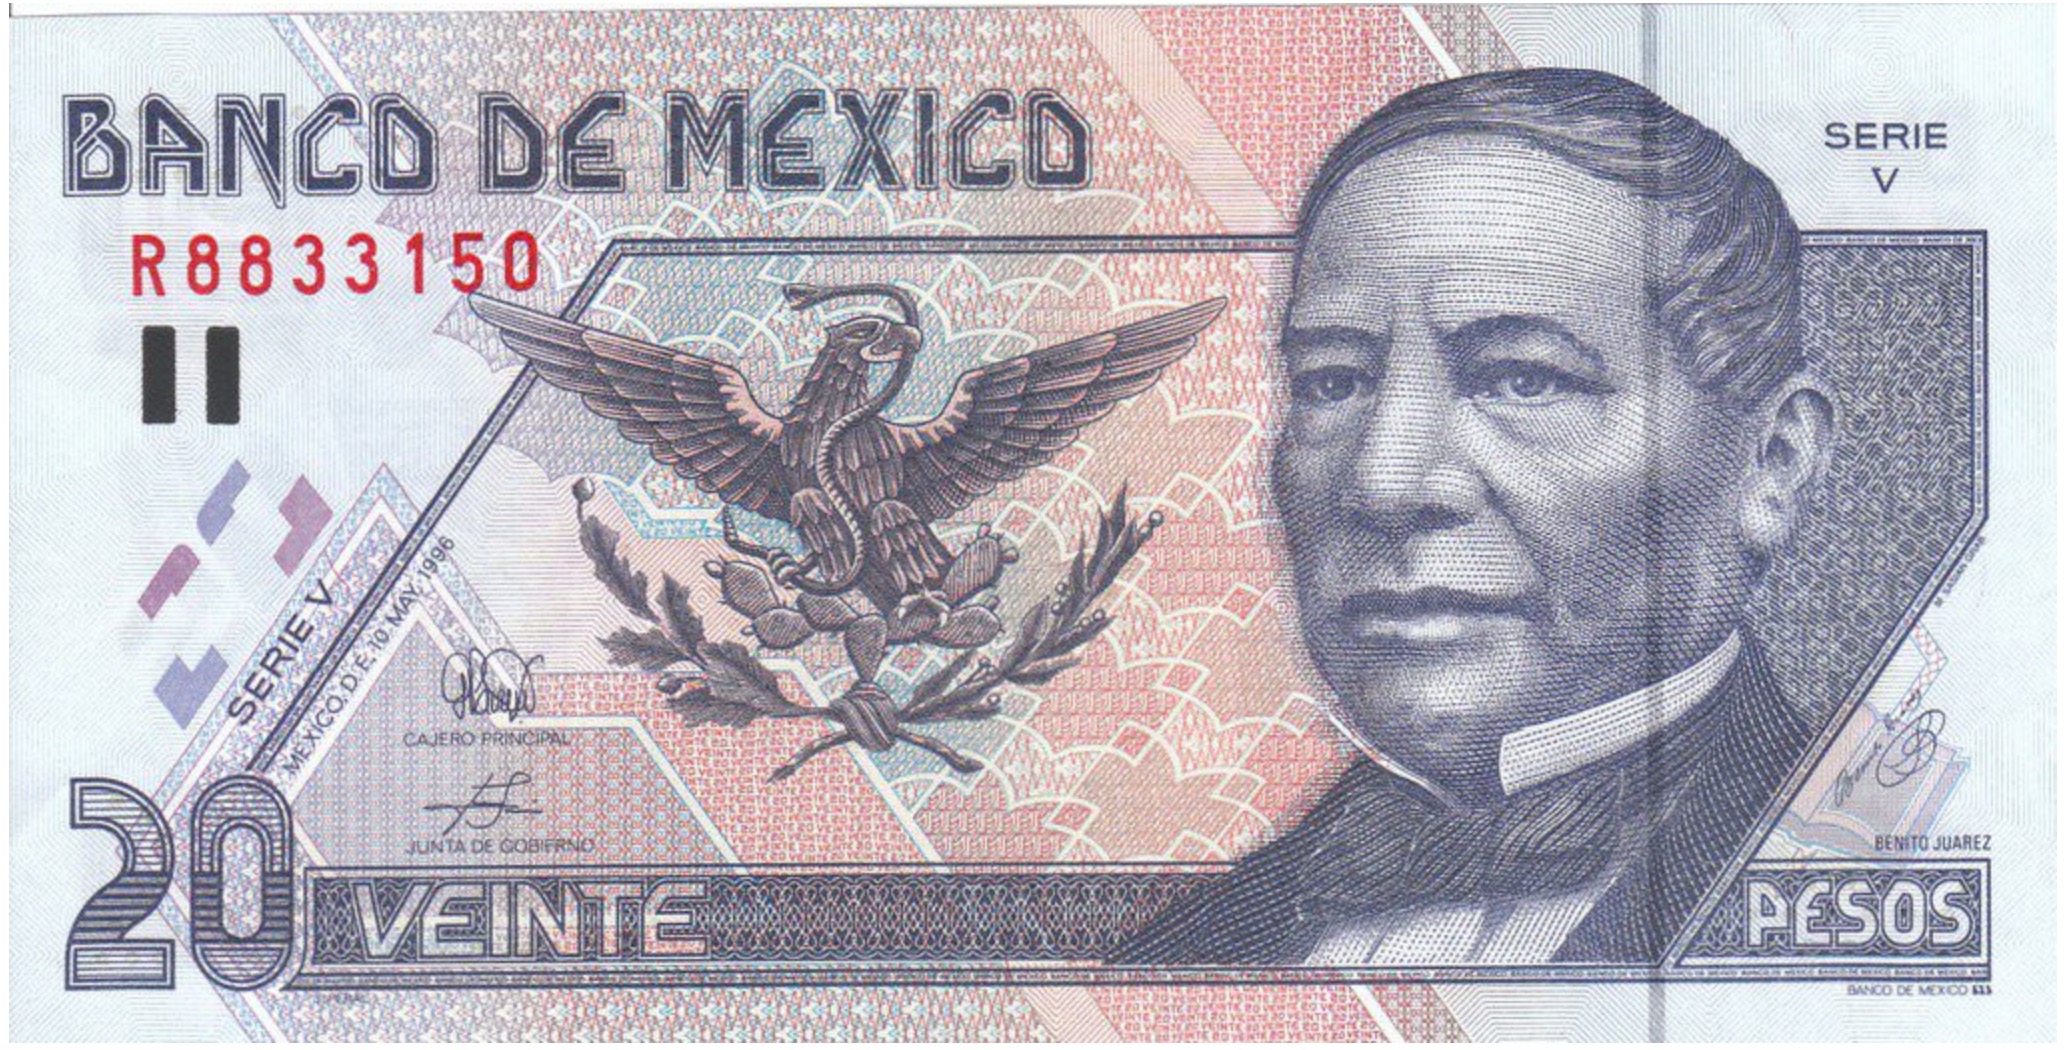 20 Mexican Pesos banknote (Series D) Exchange yours for cash today